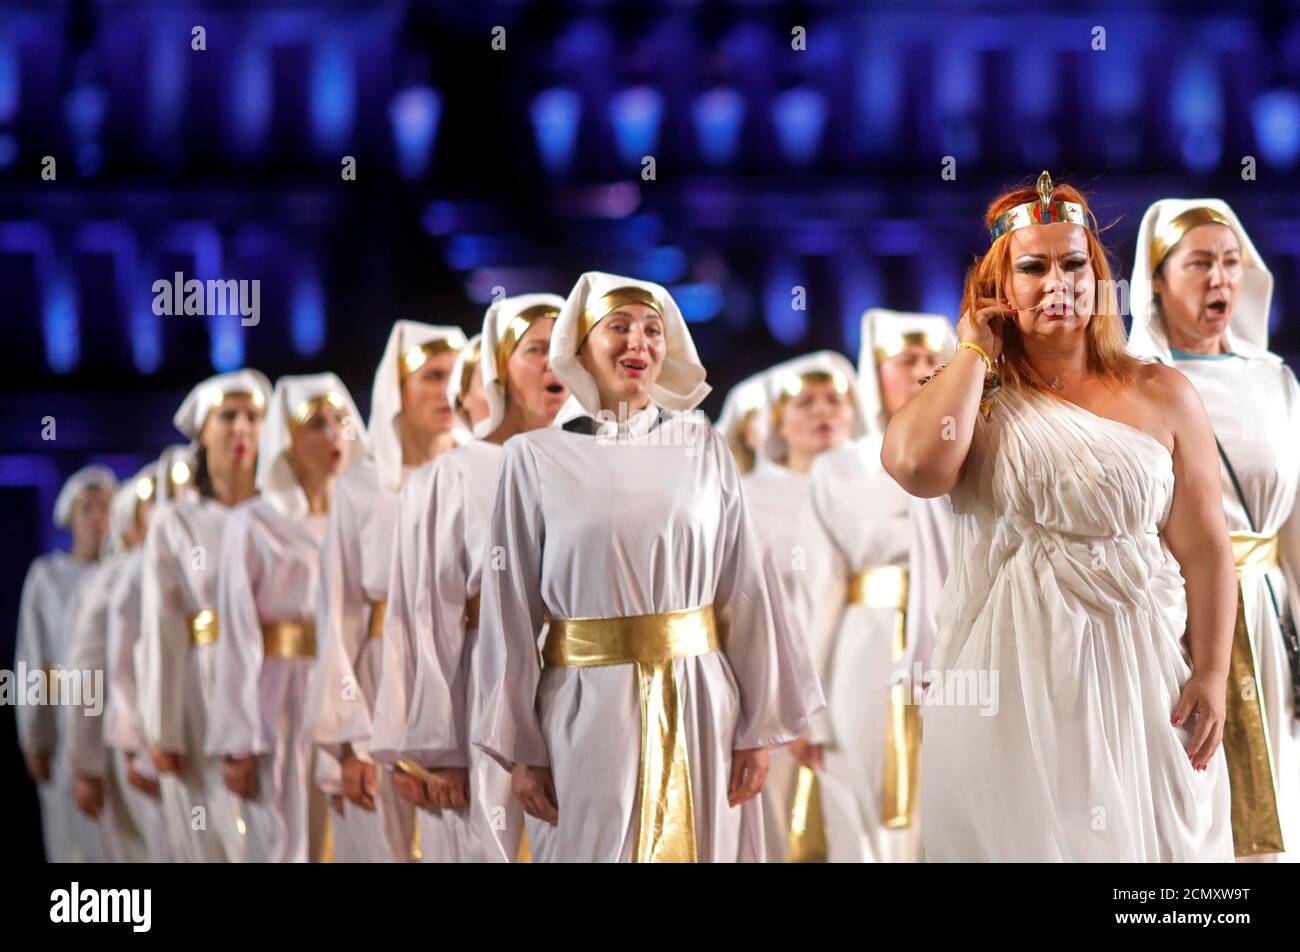 Eliska Weissova in the role of Amneris rehearses a scene from the opera 'Aida' originally set in the Old Kingdom of Egypt and composed by Giuseppe Verdi at the Temple of Queen Hatshepsut in West Bank of Luxor, Egypt, October 24, 2019. REUTERS/Amr Abdallah Dalsh Stock Photo